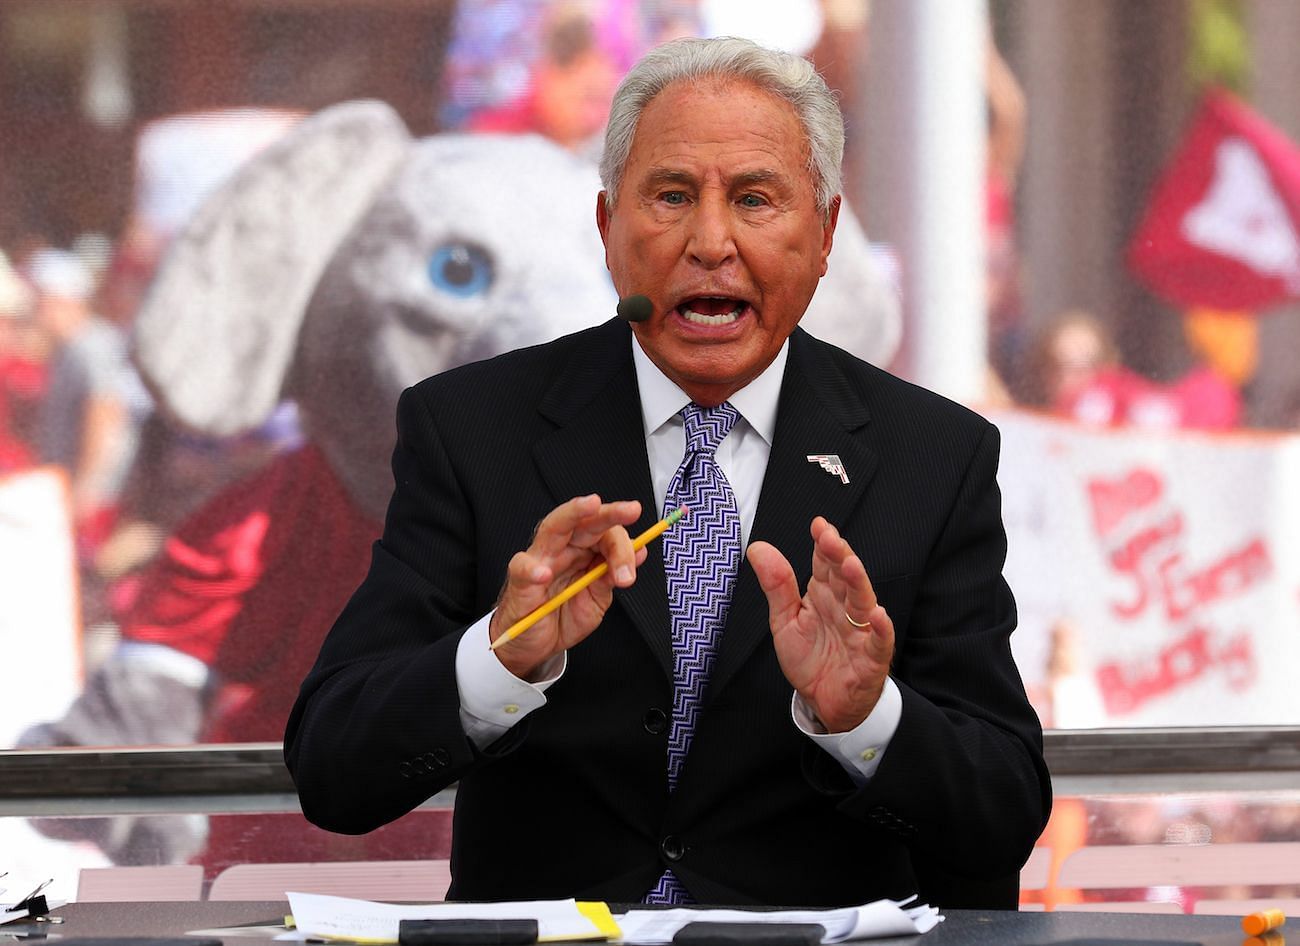 CFB fans react to Lee Corso's "F*ck it" moment on